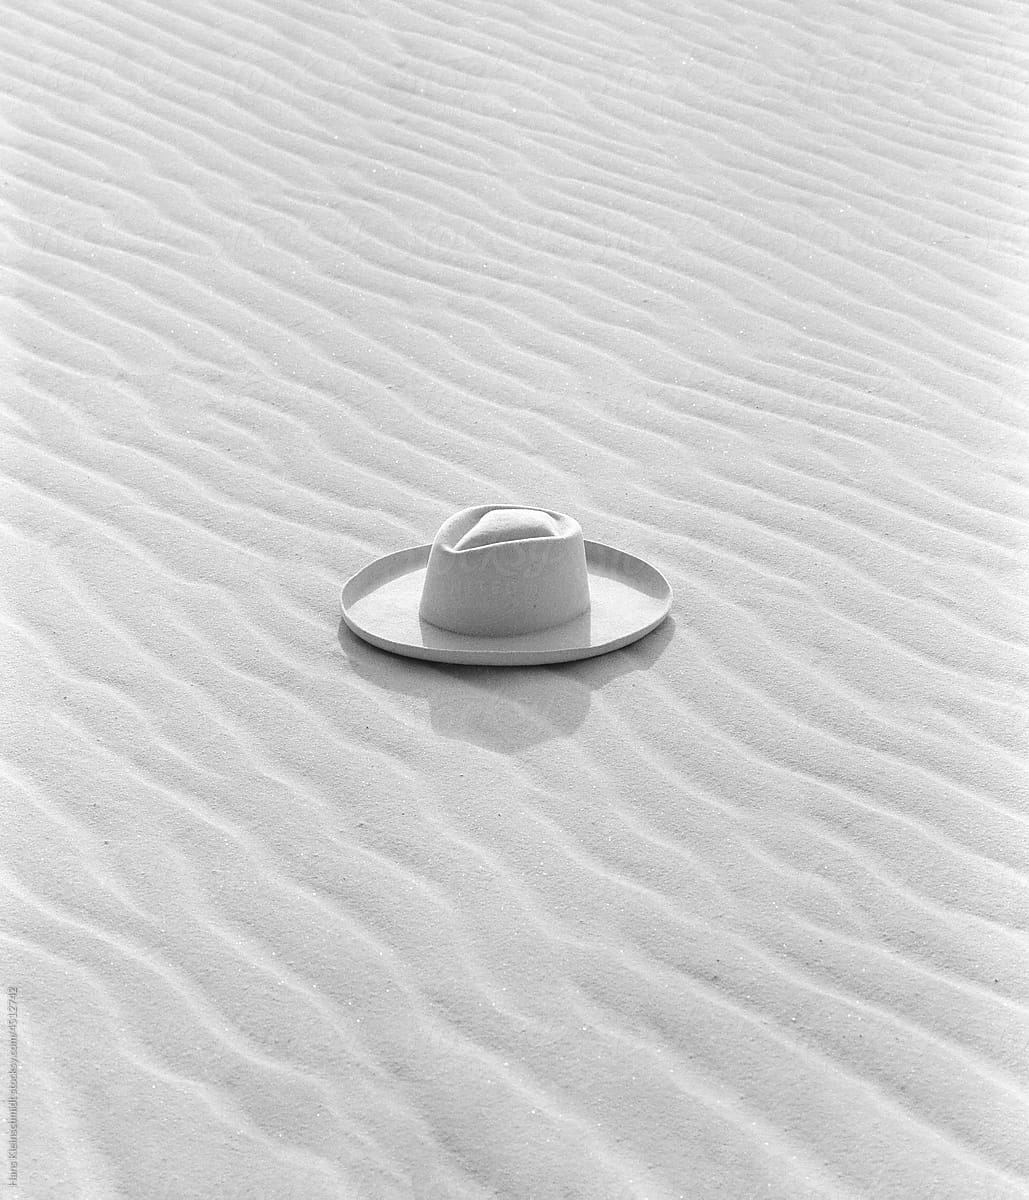 Cowboy hat in the sand